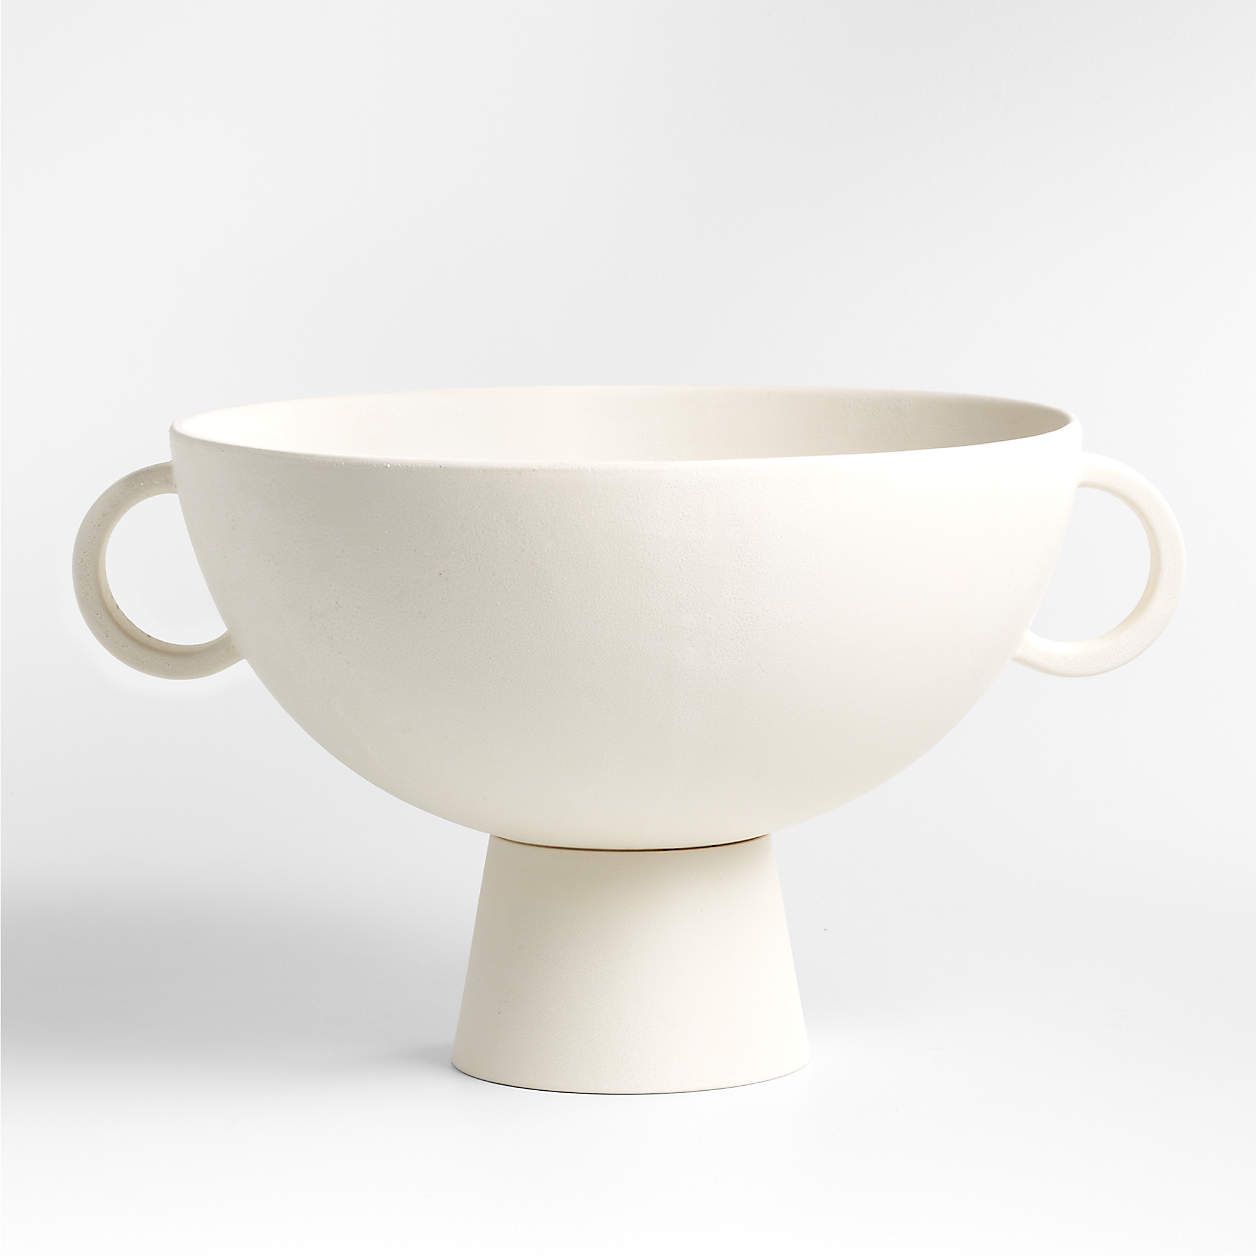 Nerida White Footed Centerpiece Bowl + Reviews | Crate & Barrel | Crate & Barrel